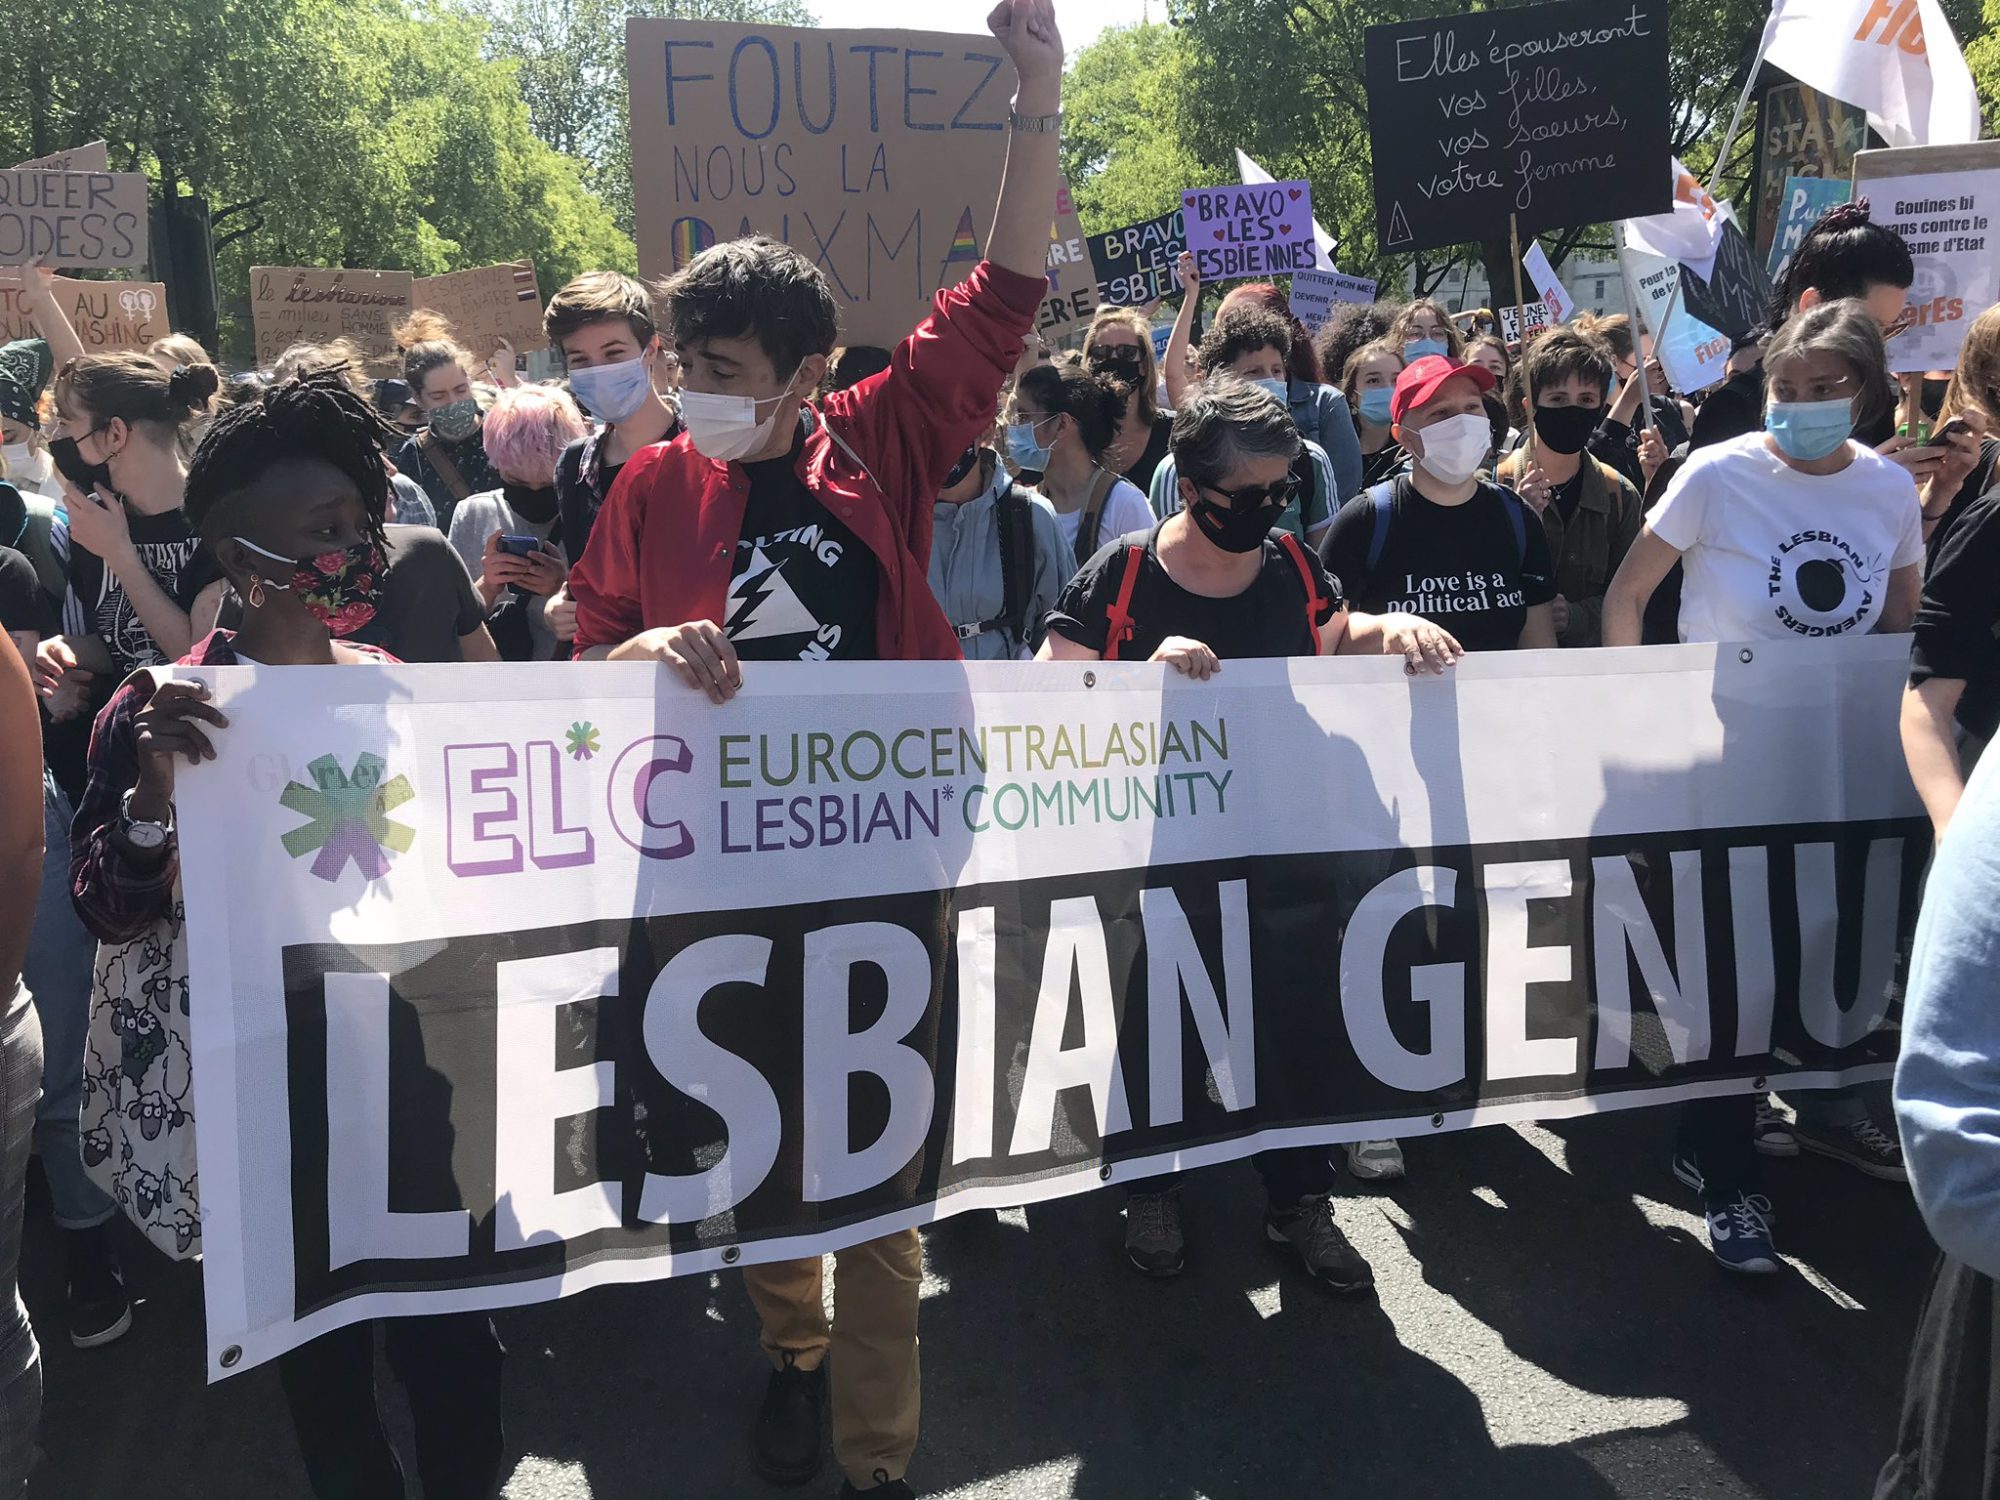 10.000 lesbians in the streets of Paris on April 25th to reclaim Assisted Reproductive Technology and visibility.